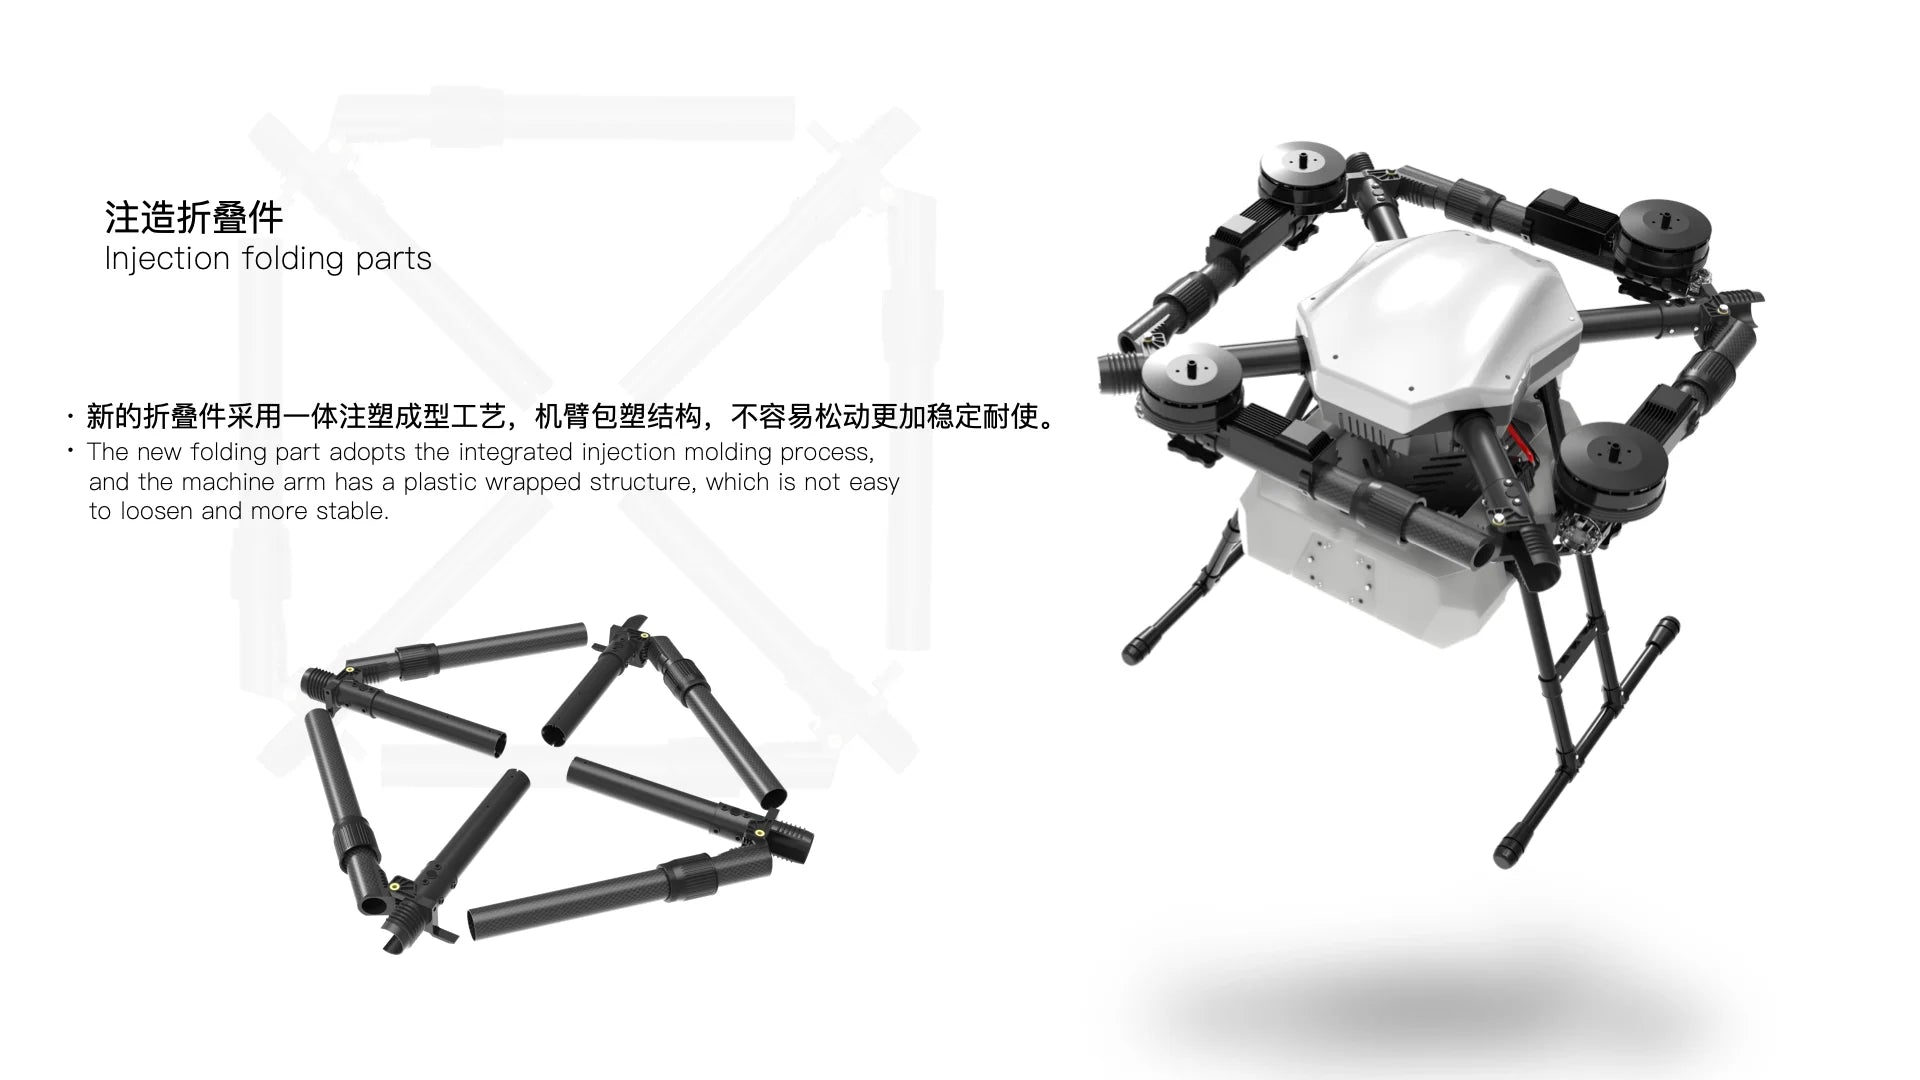 JIS EV422 22L Agriculture drone, the machine arm has plastic wrapped structure, which is not easy to loosen and more stable 